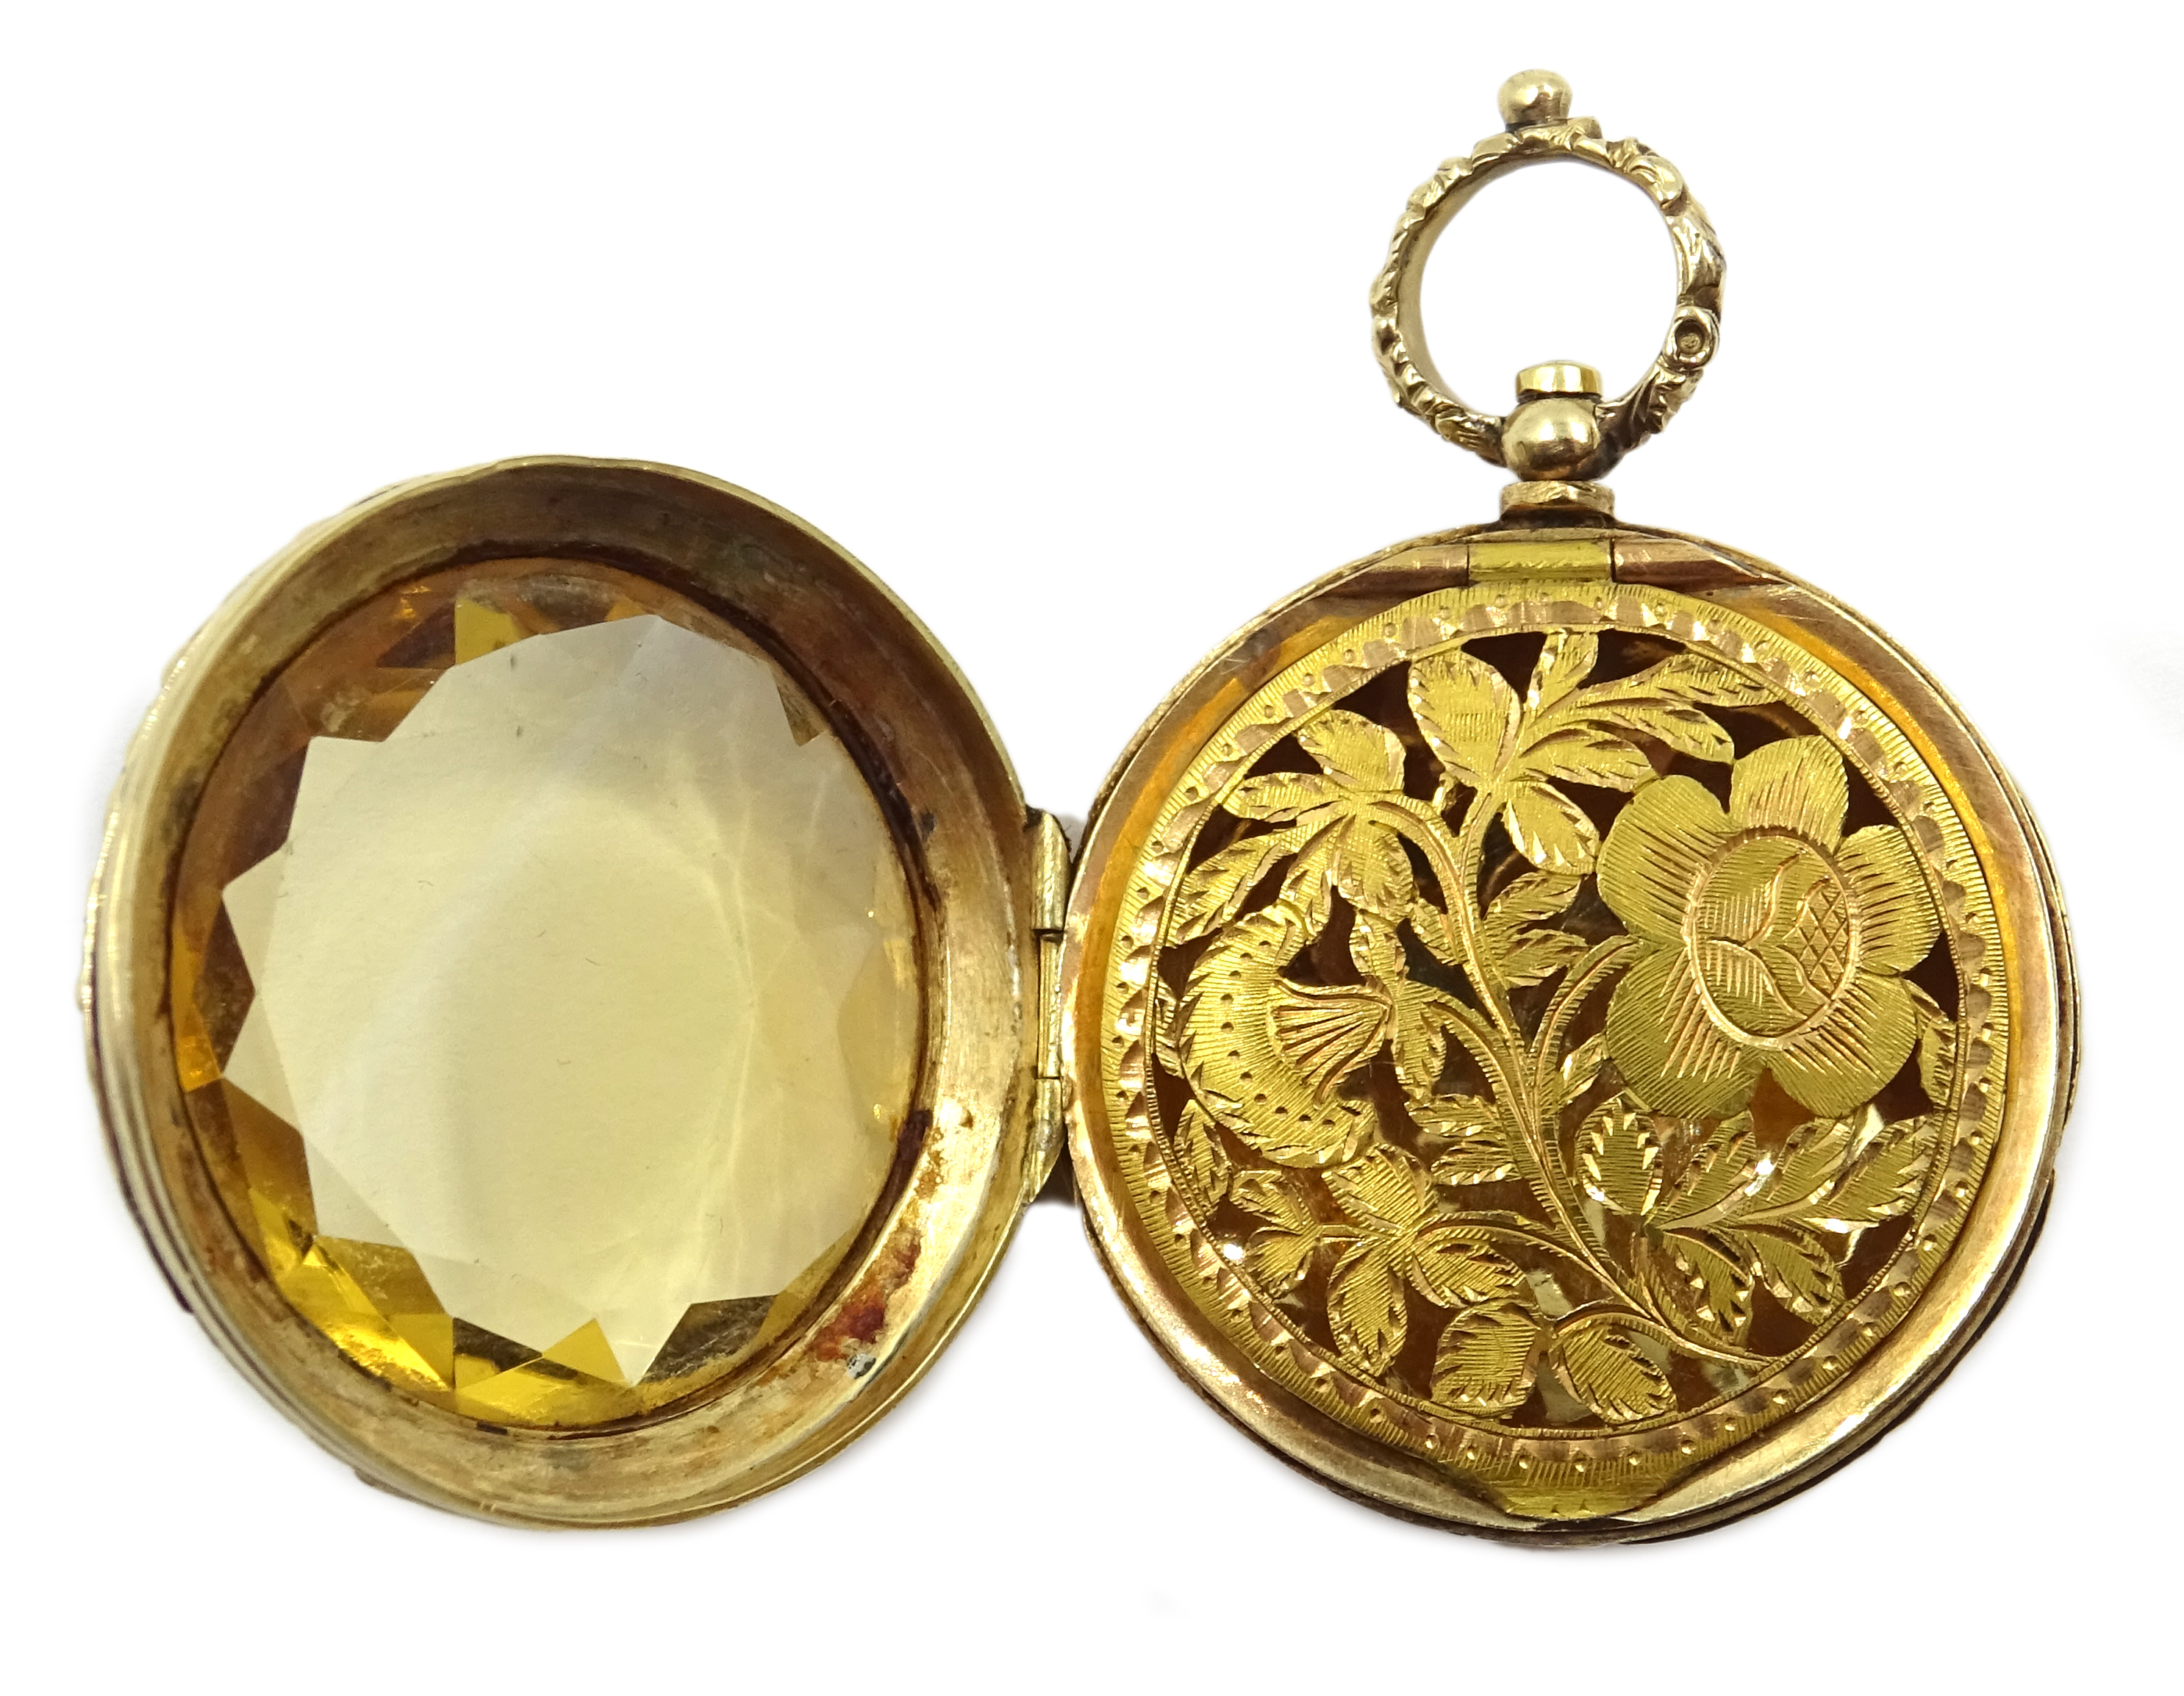 George IV circular gold citrine vinaigrette, the faceted citrine mounted in the lid, - Image 6 of 7